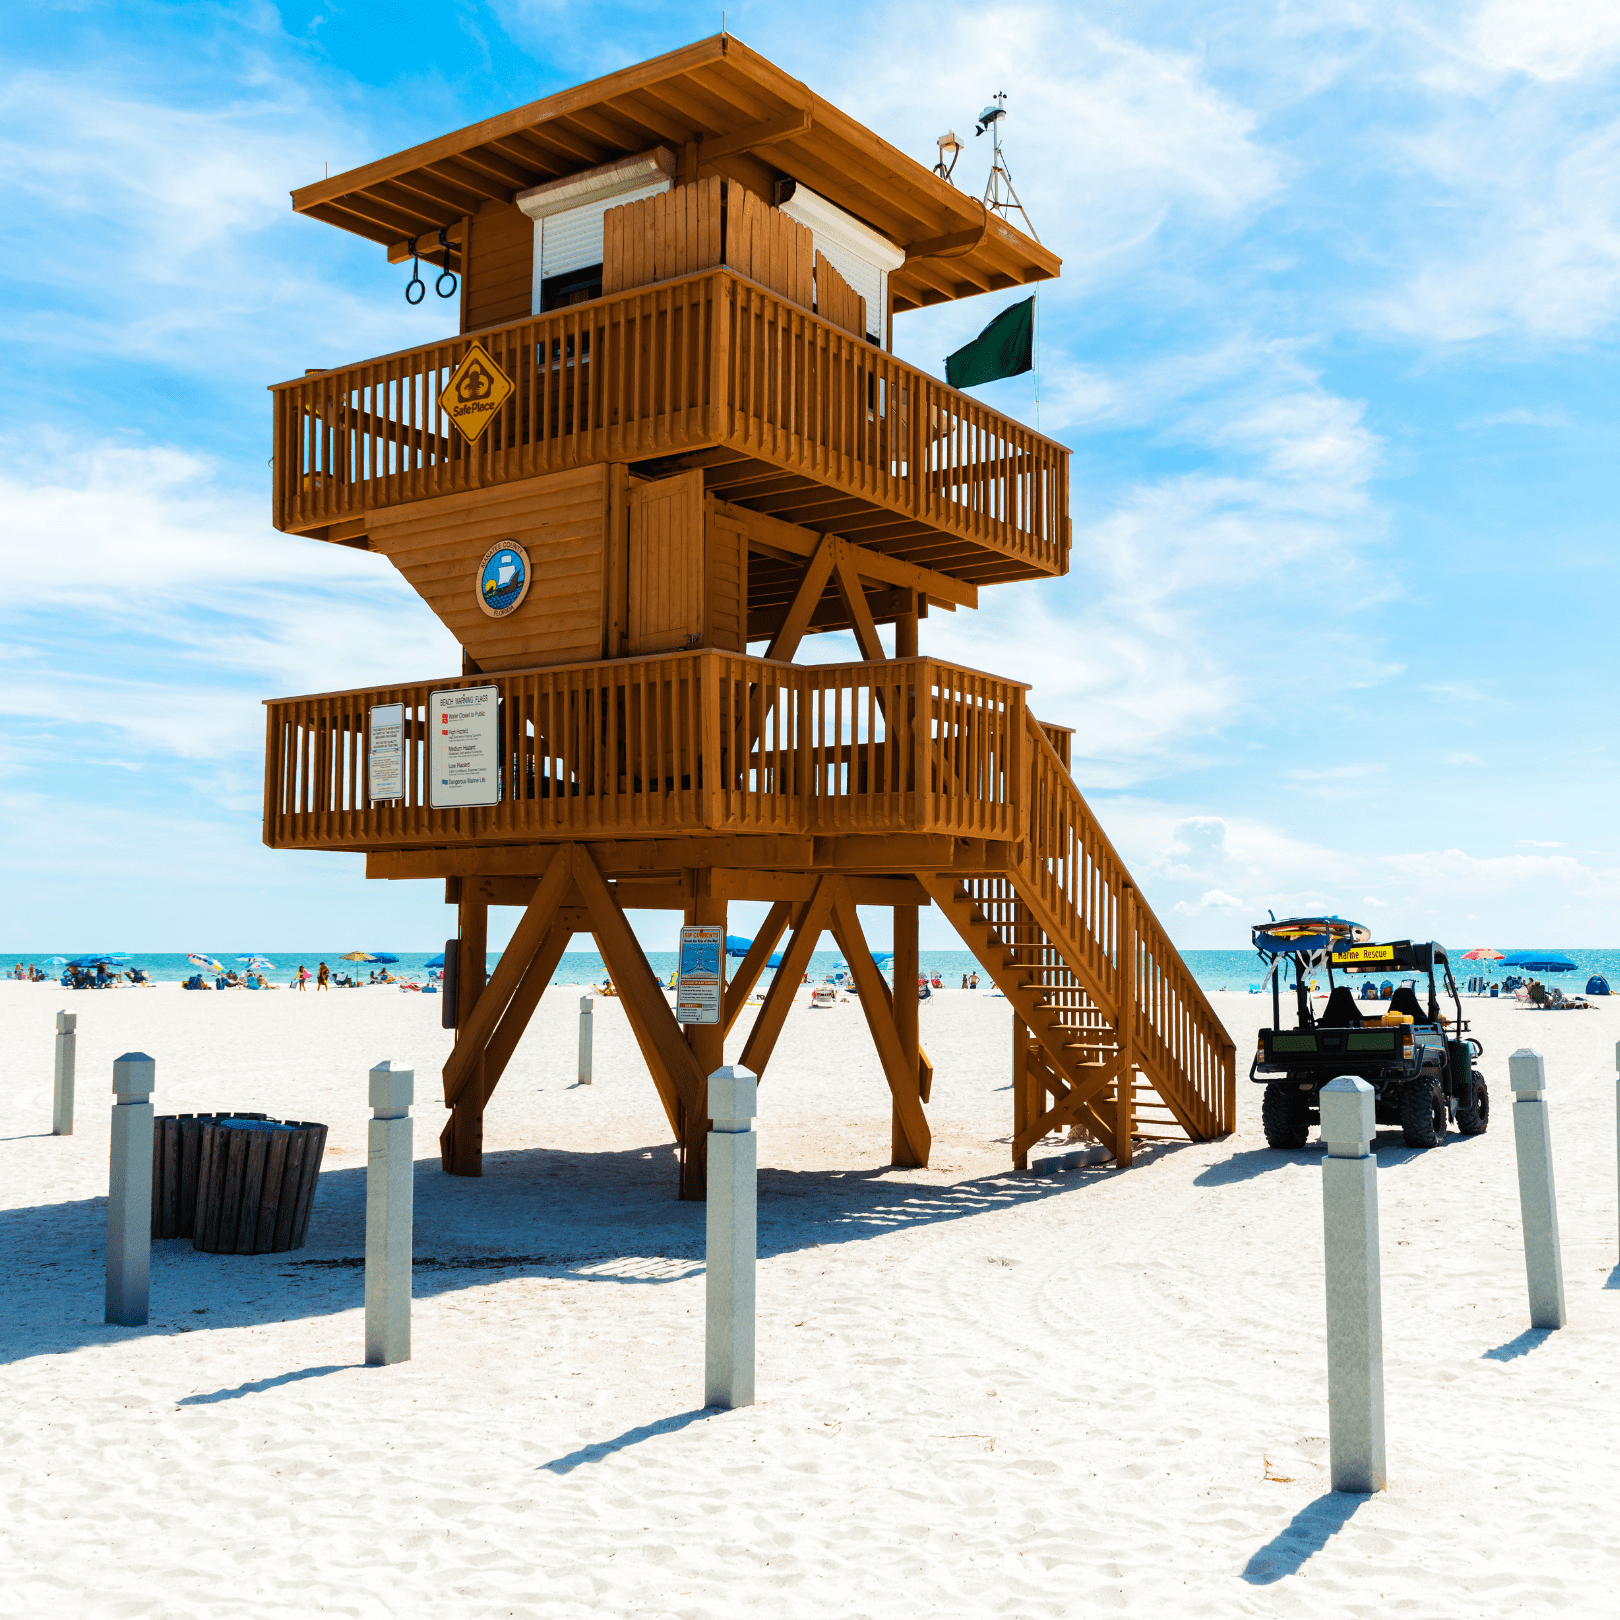 A short distance from our Anna Maria island vacation rentals, this is a two story wooden life guard stand on Manatee Beach on Anna Maria Island